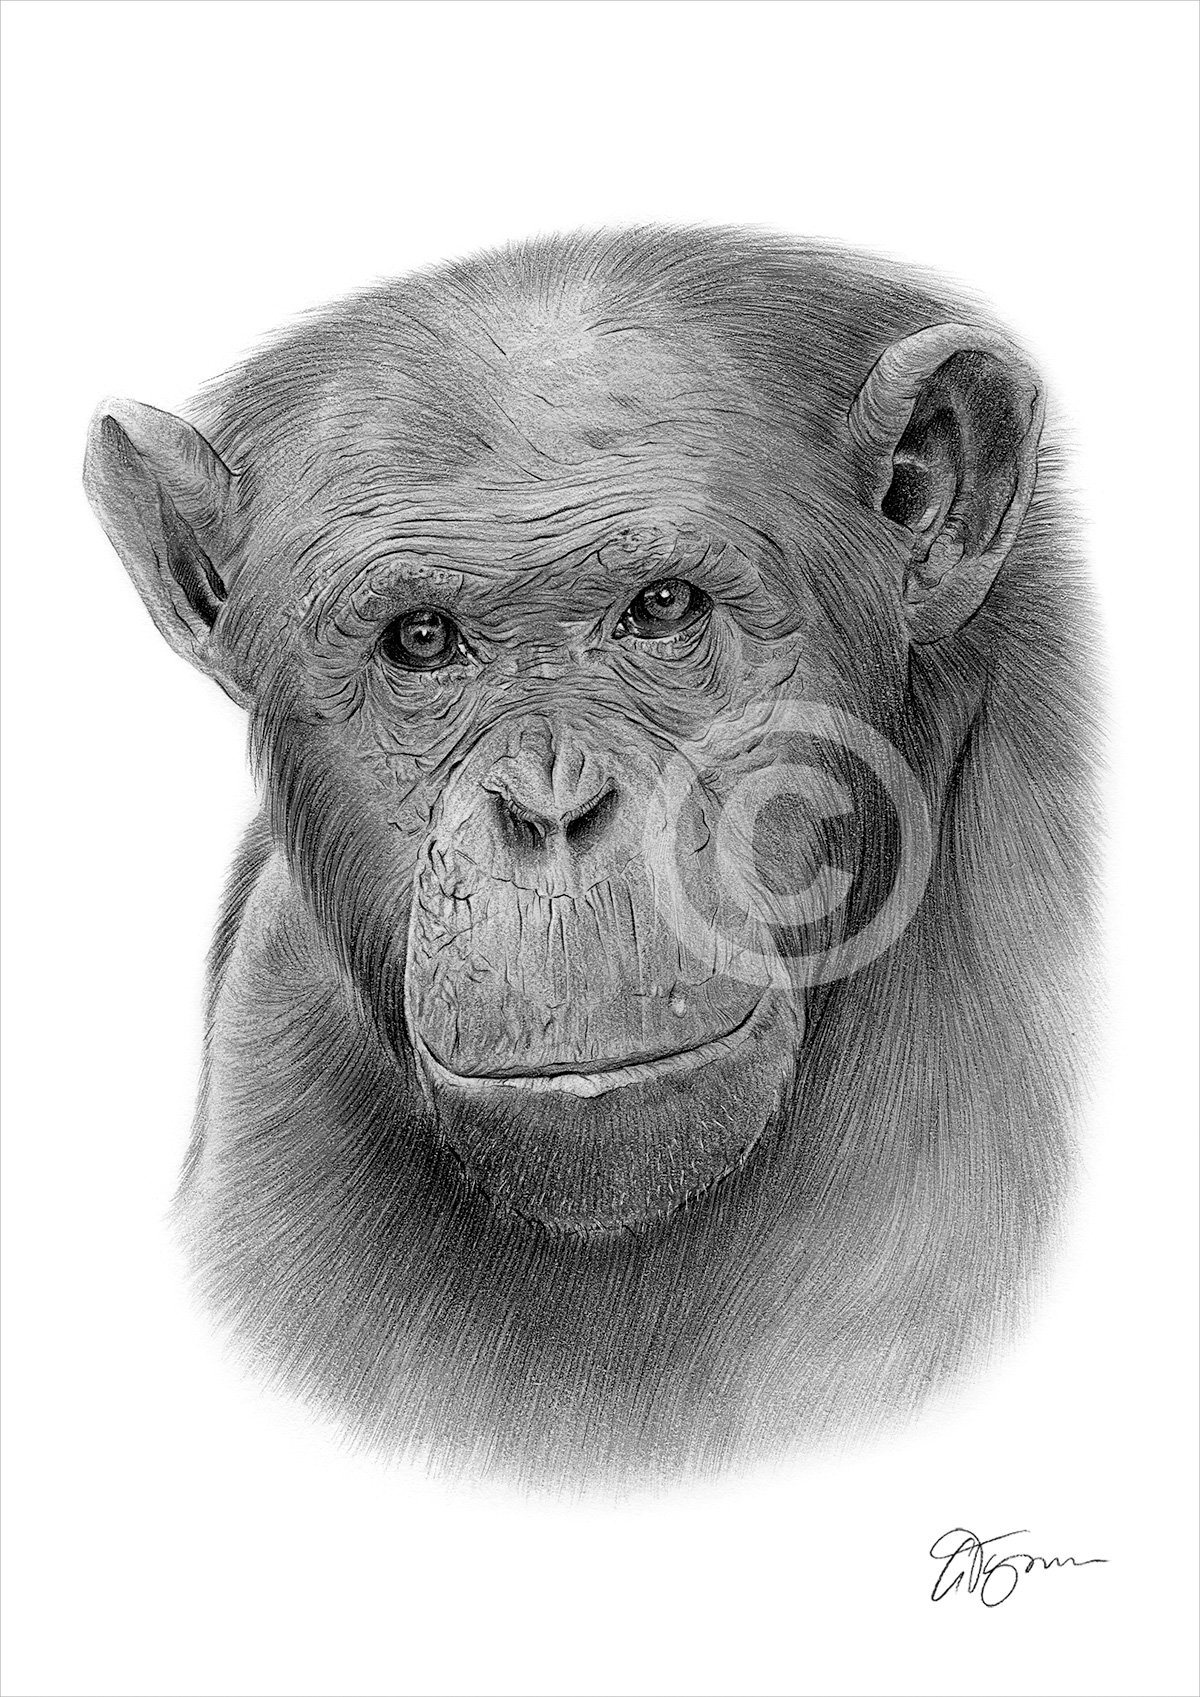 Pencil drawing of an adult chimpanzee by artist Gary Tymon